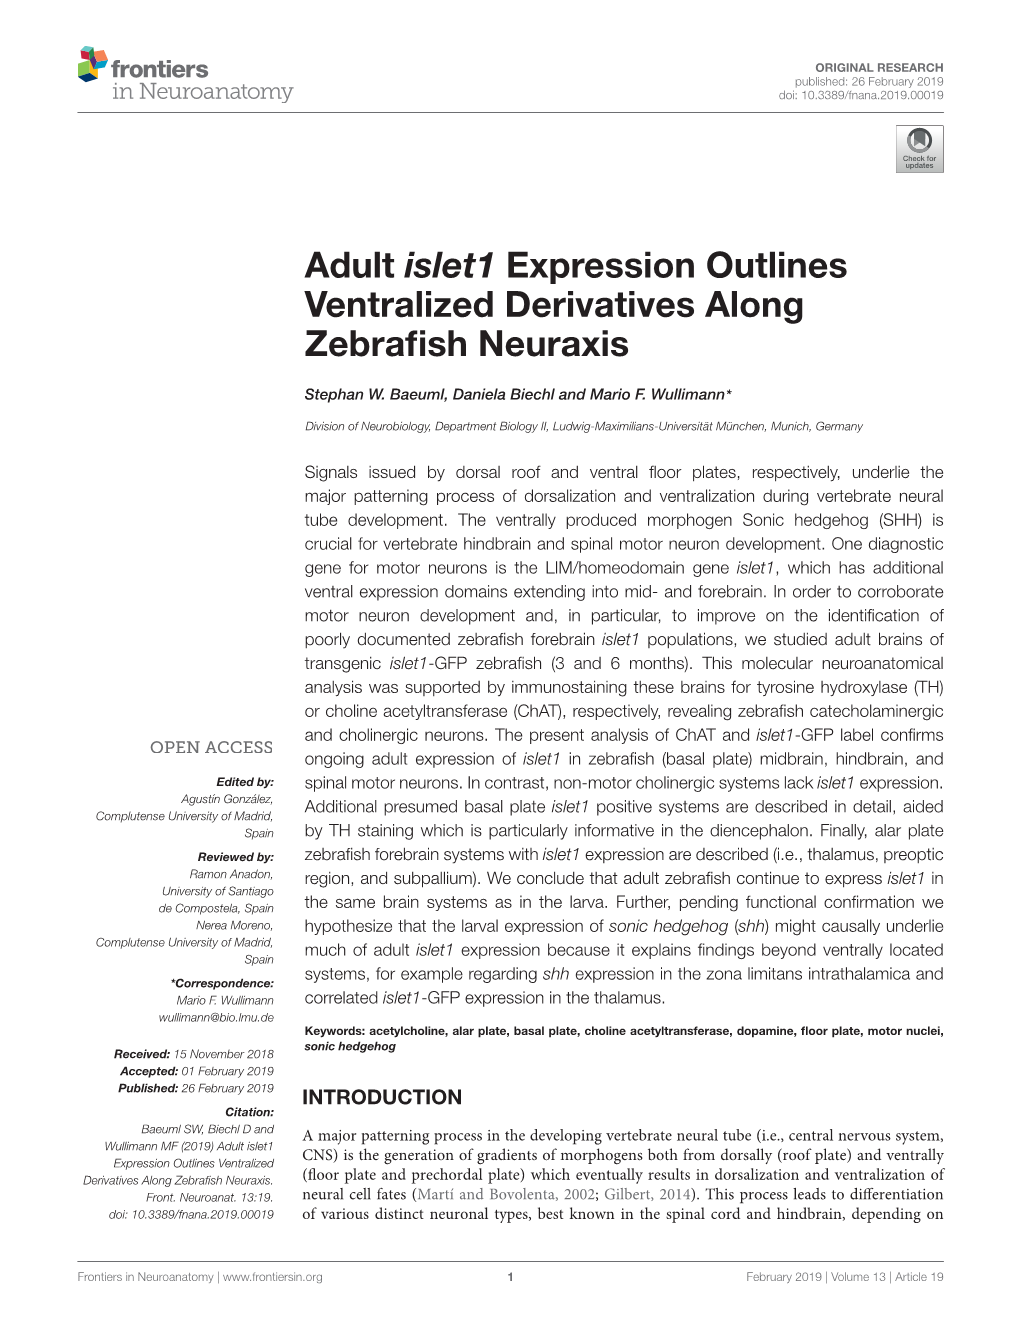 Adult Islet1 Expression Outlines Ventralized Derivatives Along Zebraﬁsh Neuraxis